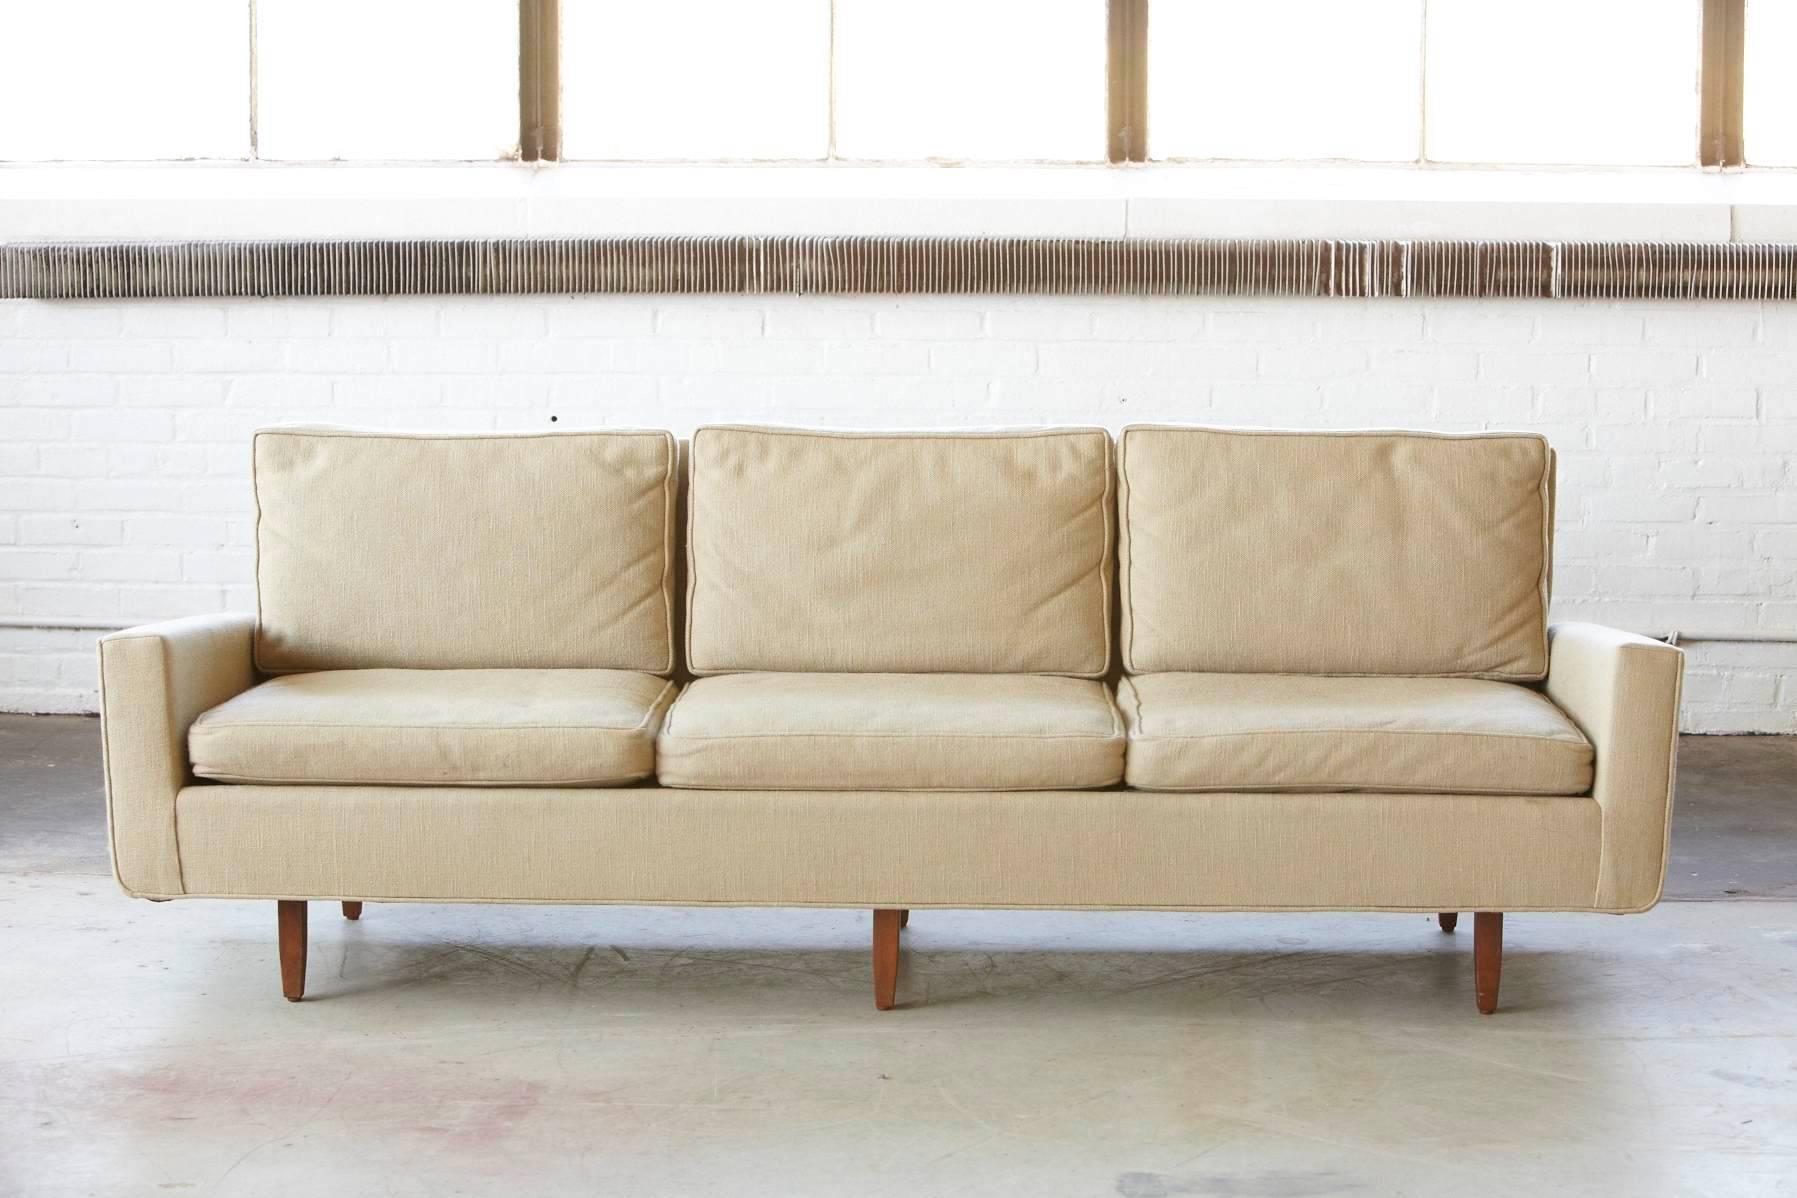 Original, early Florence Knoll sofa from 1967. A copy of the original Knoll Associates sales order and the invoice dating 05/16/1967 will be included. 
Solid square walnut legs with oil finish.
Model # 26D, 14 yards of fabric, # KL 64 - putty or